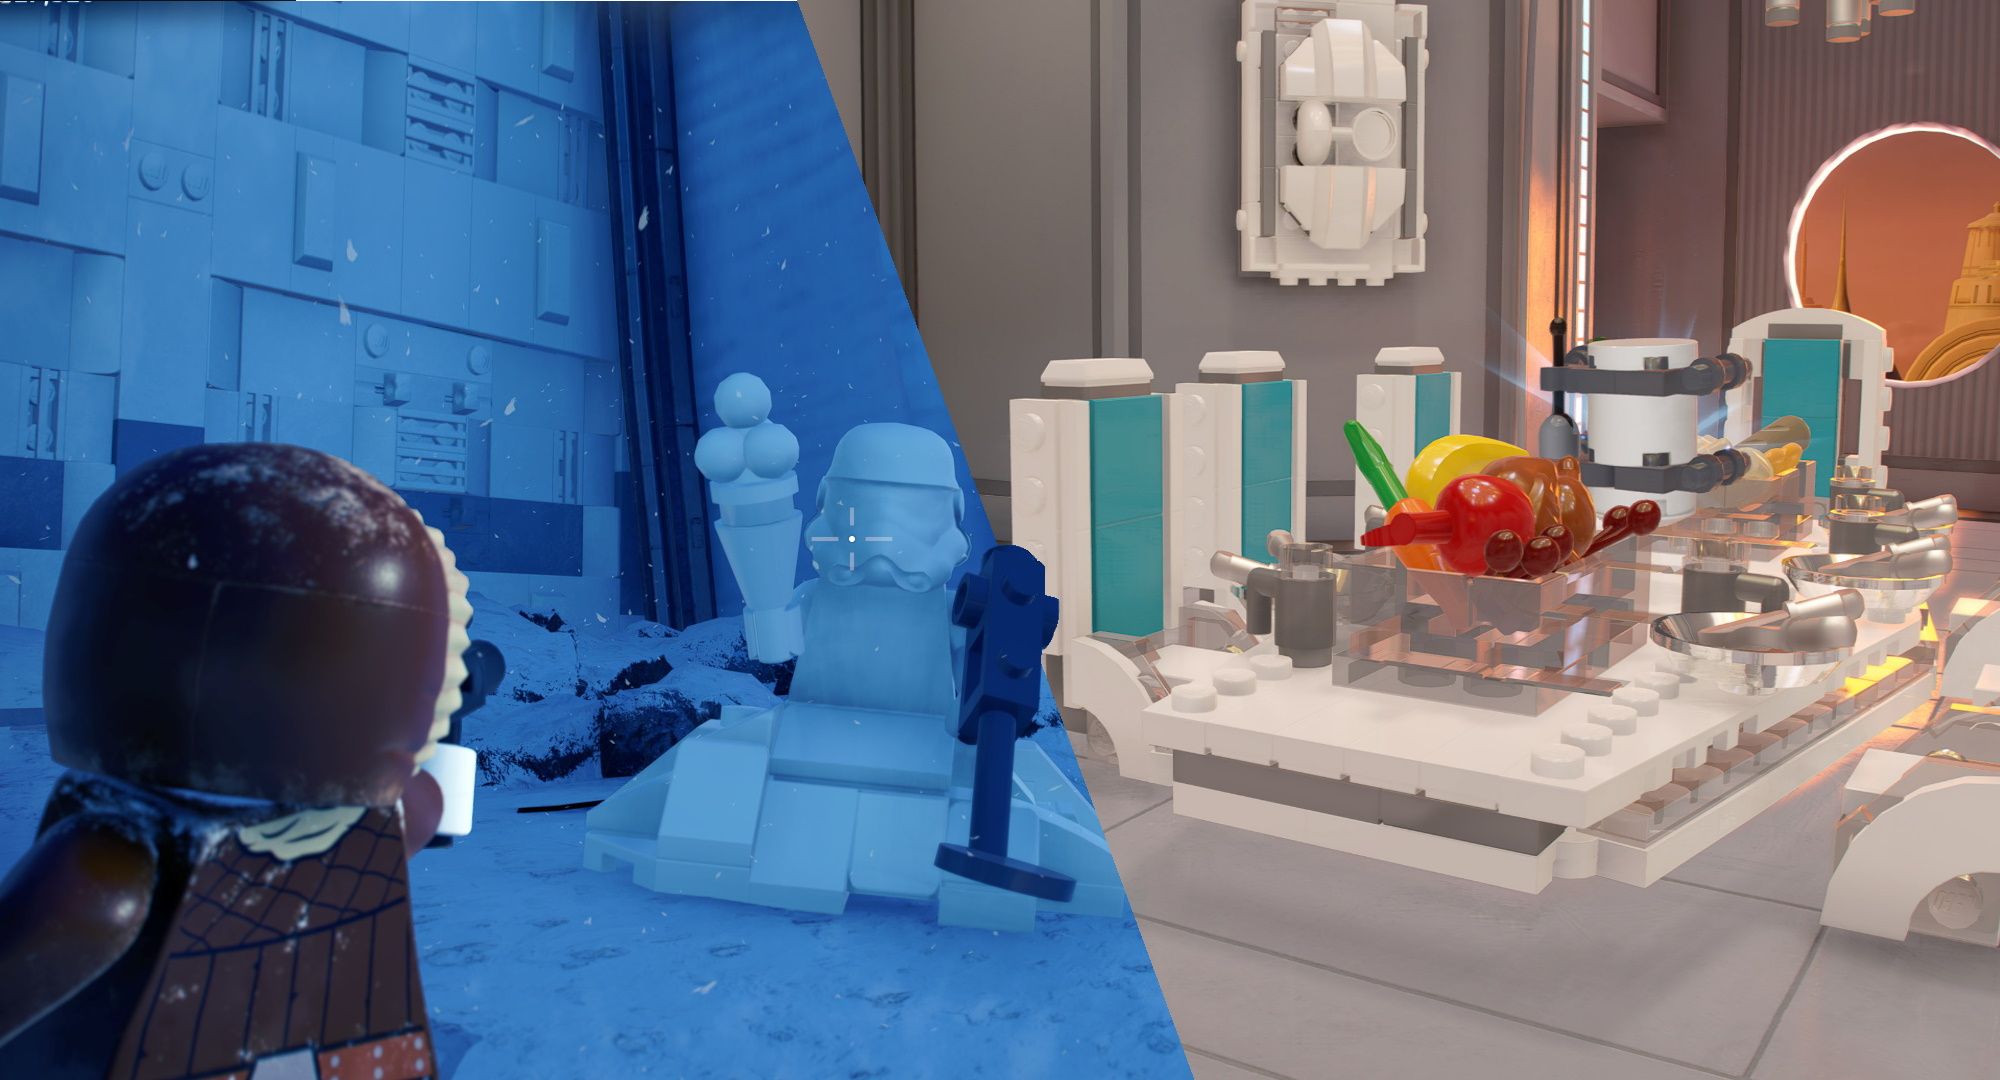 To Find All The Empire Back Minikits in Lego Star Wars: The Skywalker Saga